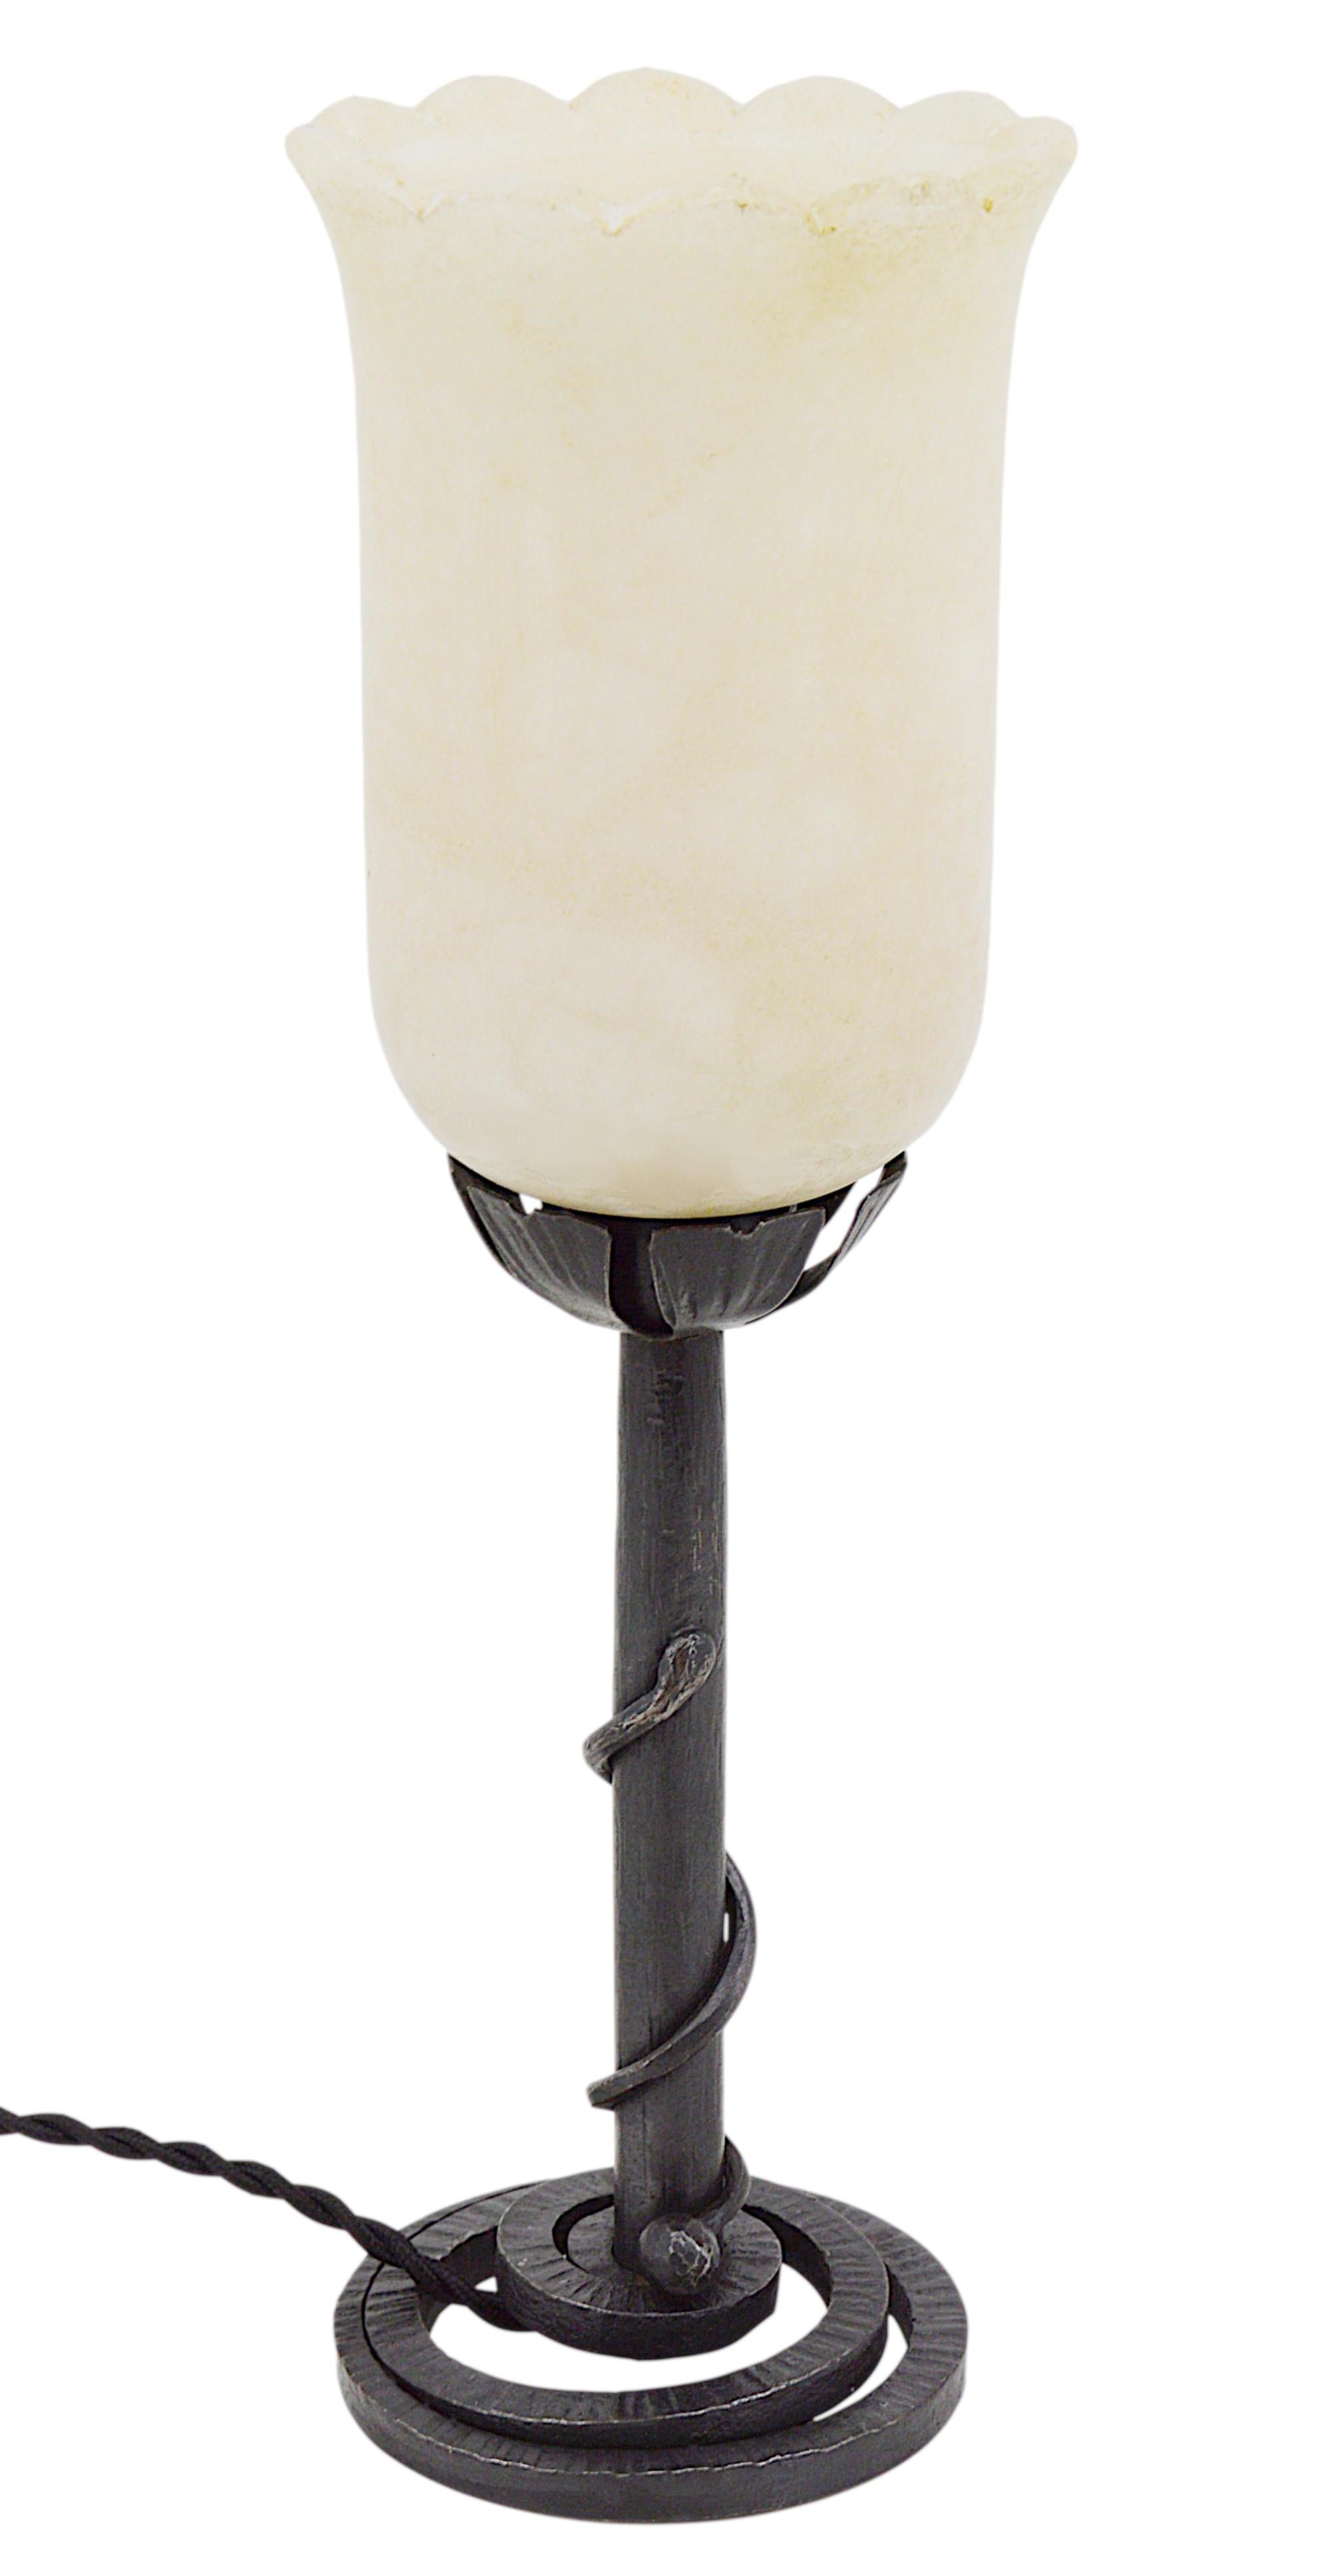 French Art Deco table lamp, France, 1920s. Classy modernist alabaster shade on its wrought-iron base symbolizing a snake. The base is stamped 